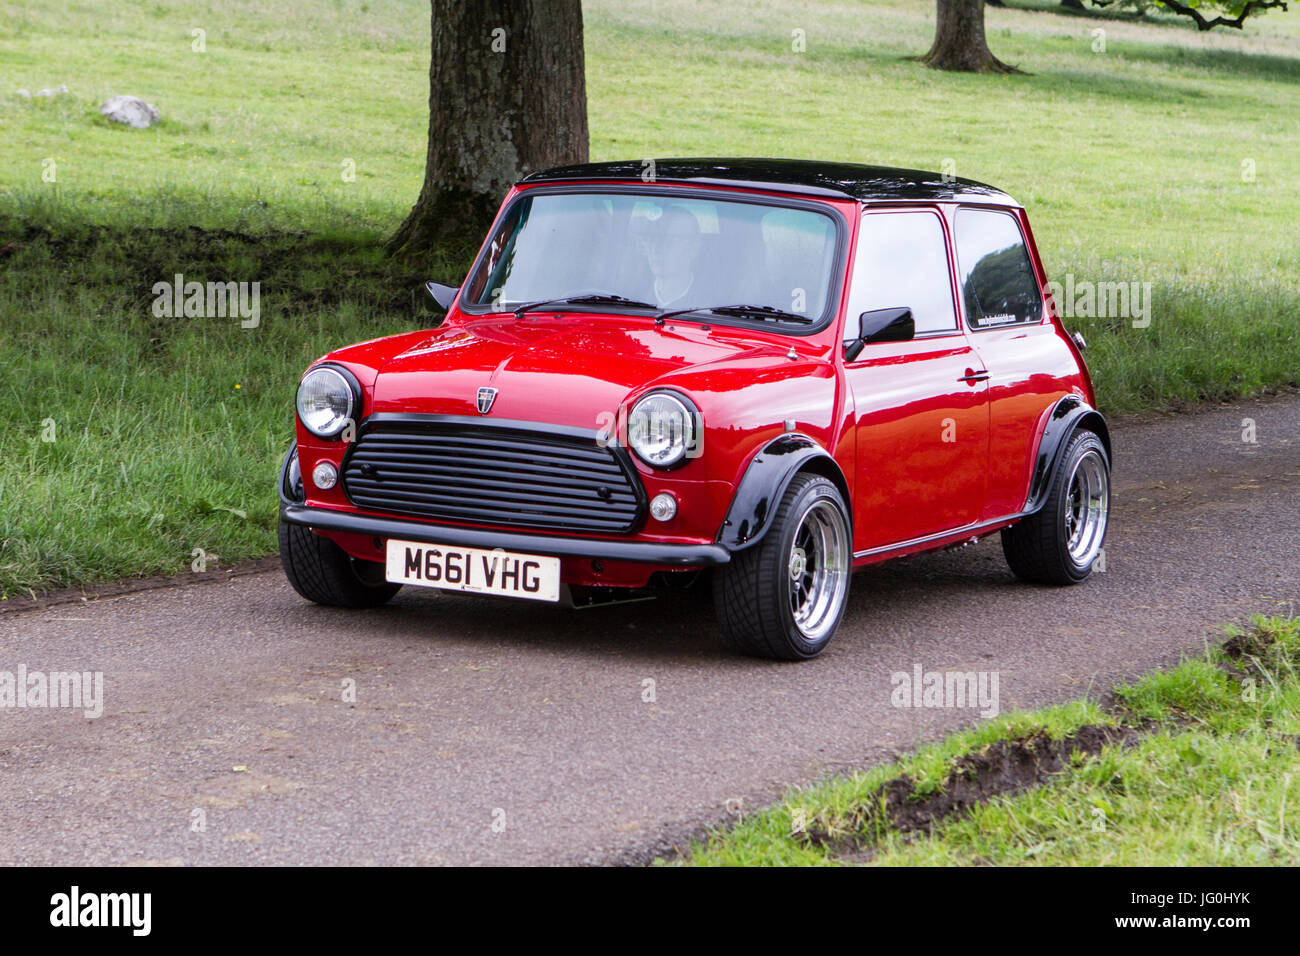 1995 Rover Mini Sprite Mark Woodward Classic Events,  classic cars, & vintage vehicles. Stock Photo